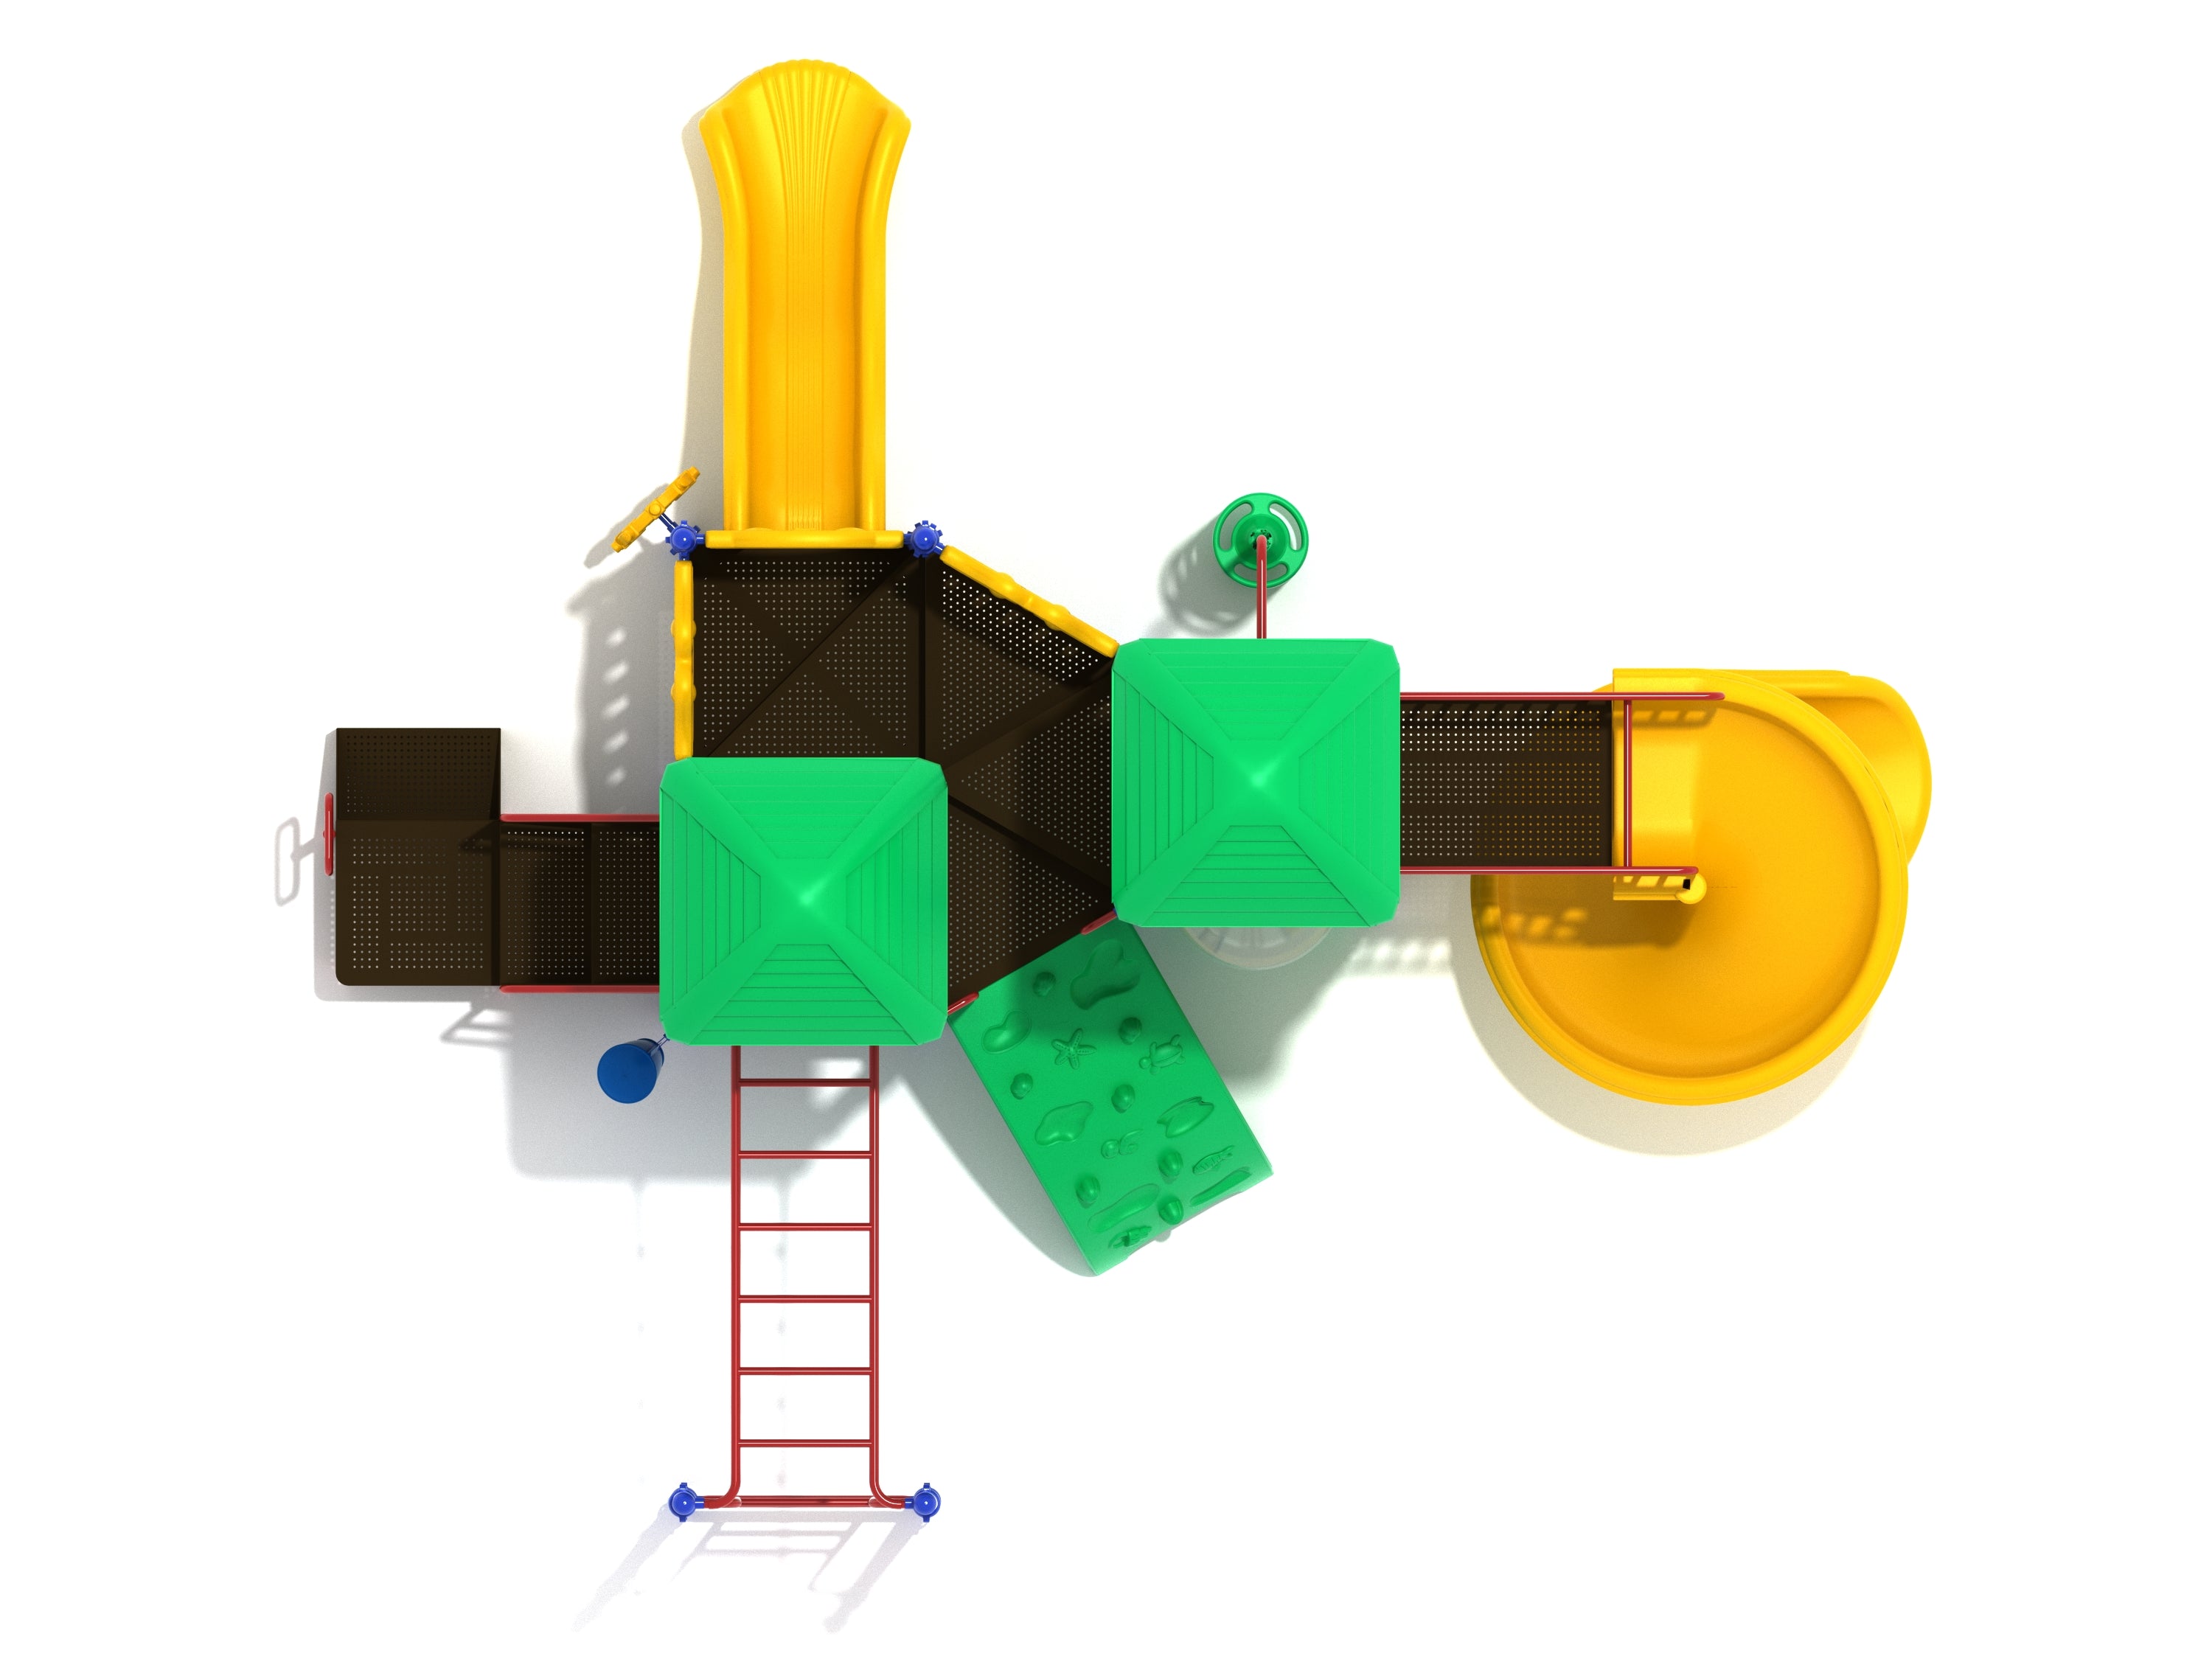 Coopers Neck Play System Top View